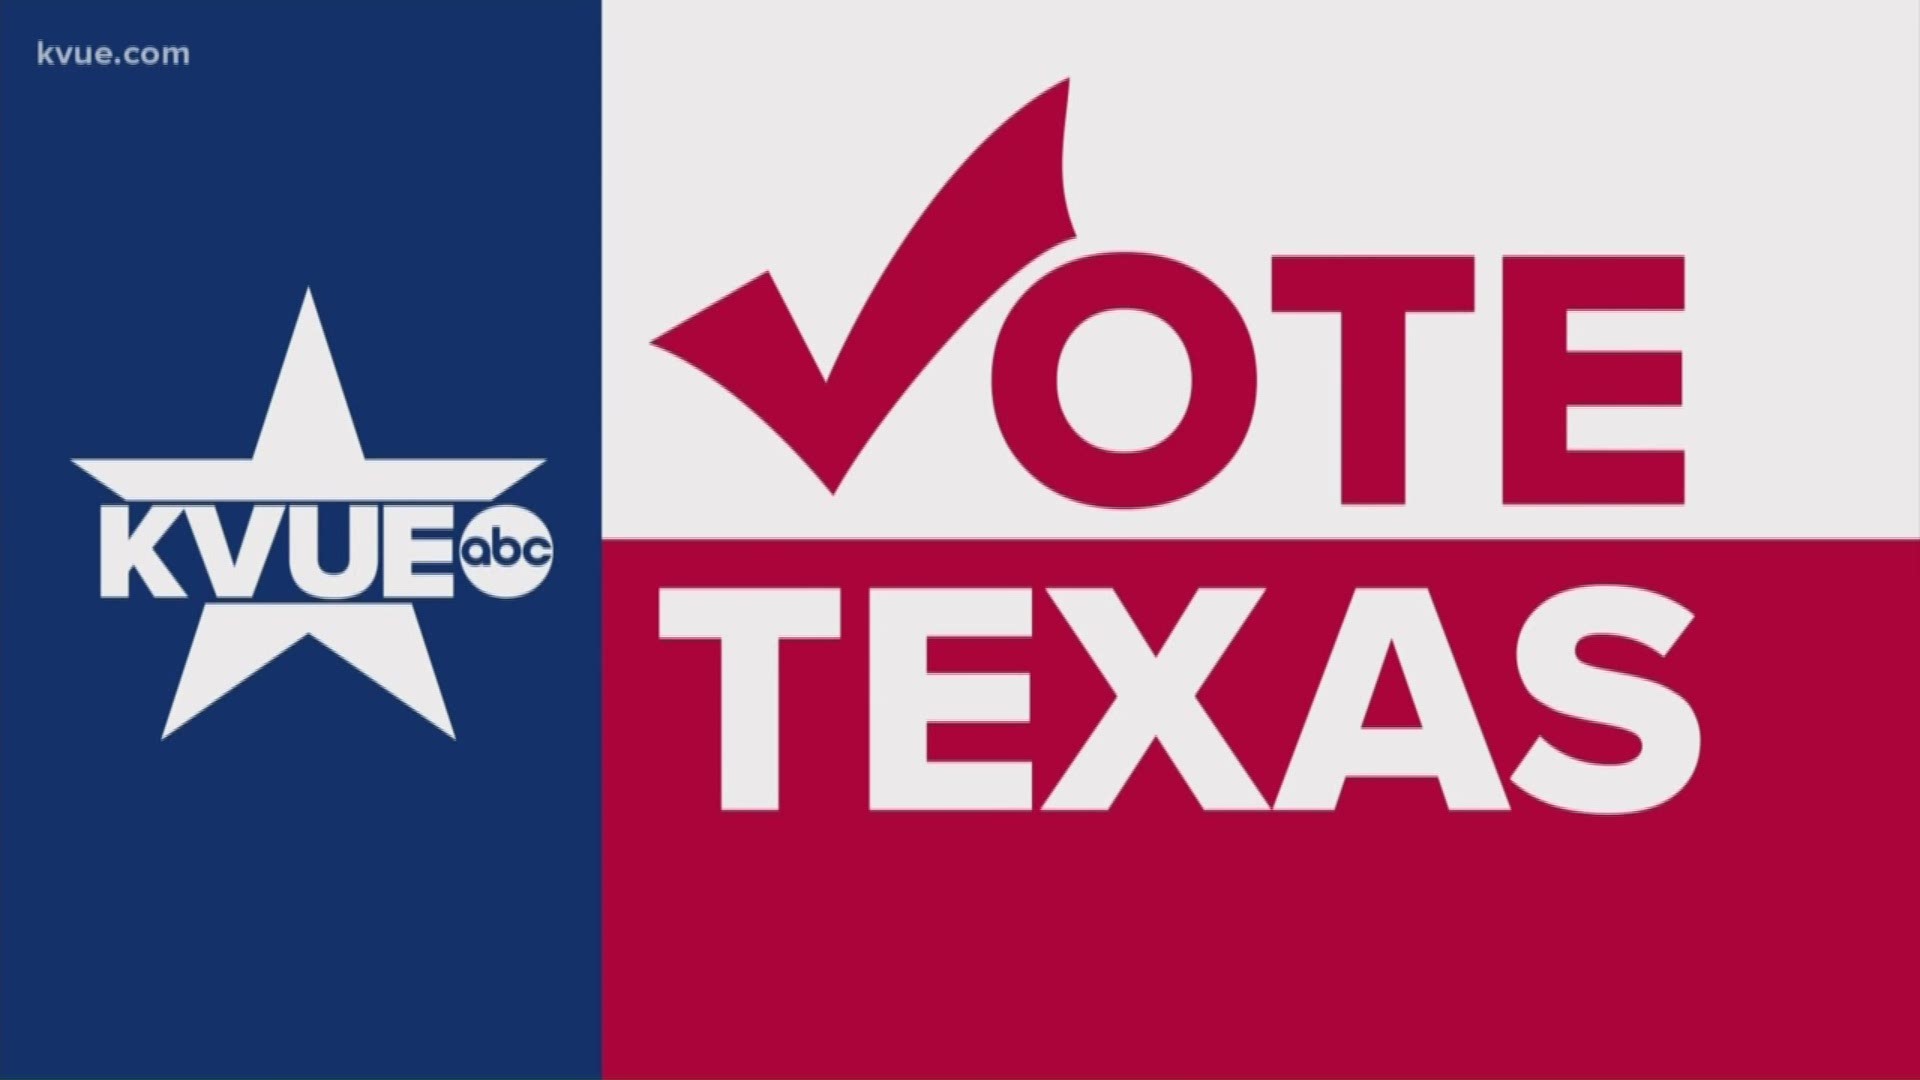 Texas voters will cast ballots in the Democratic presidential race and the U.S. Senate Democratic primary.